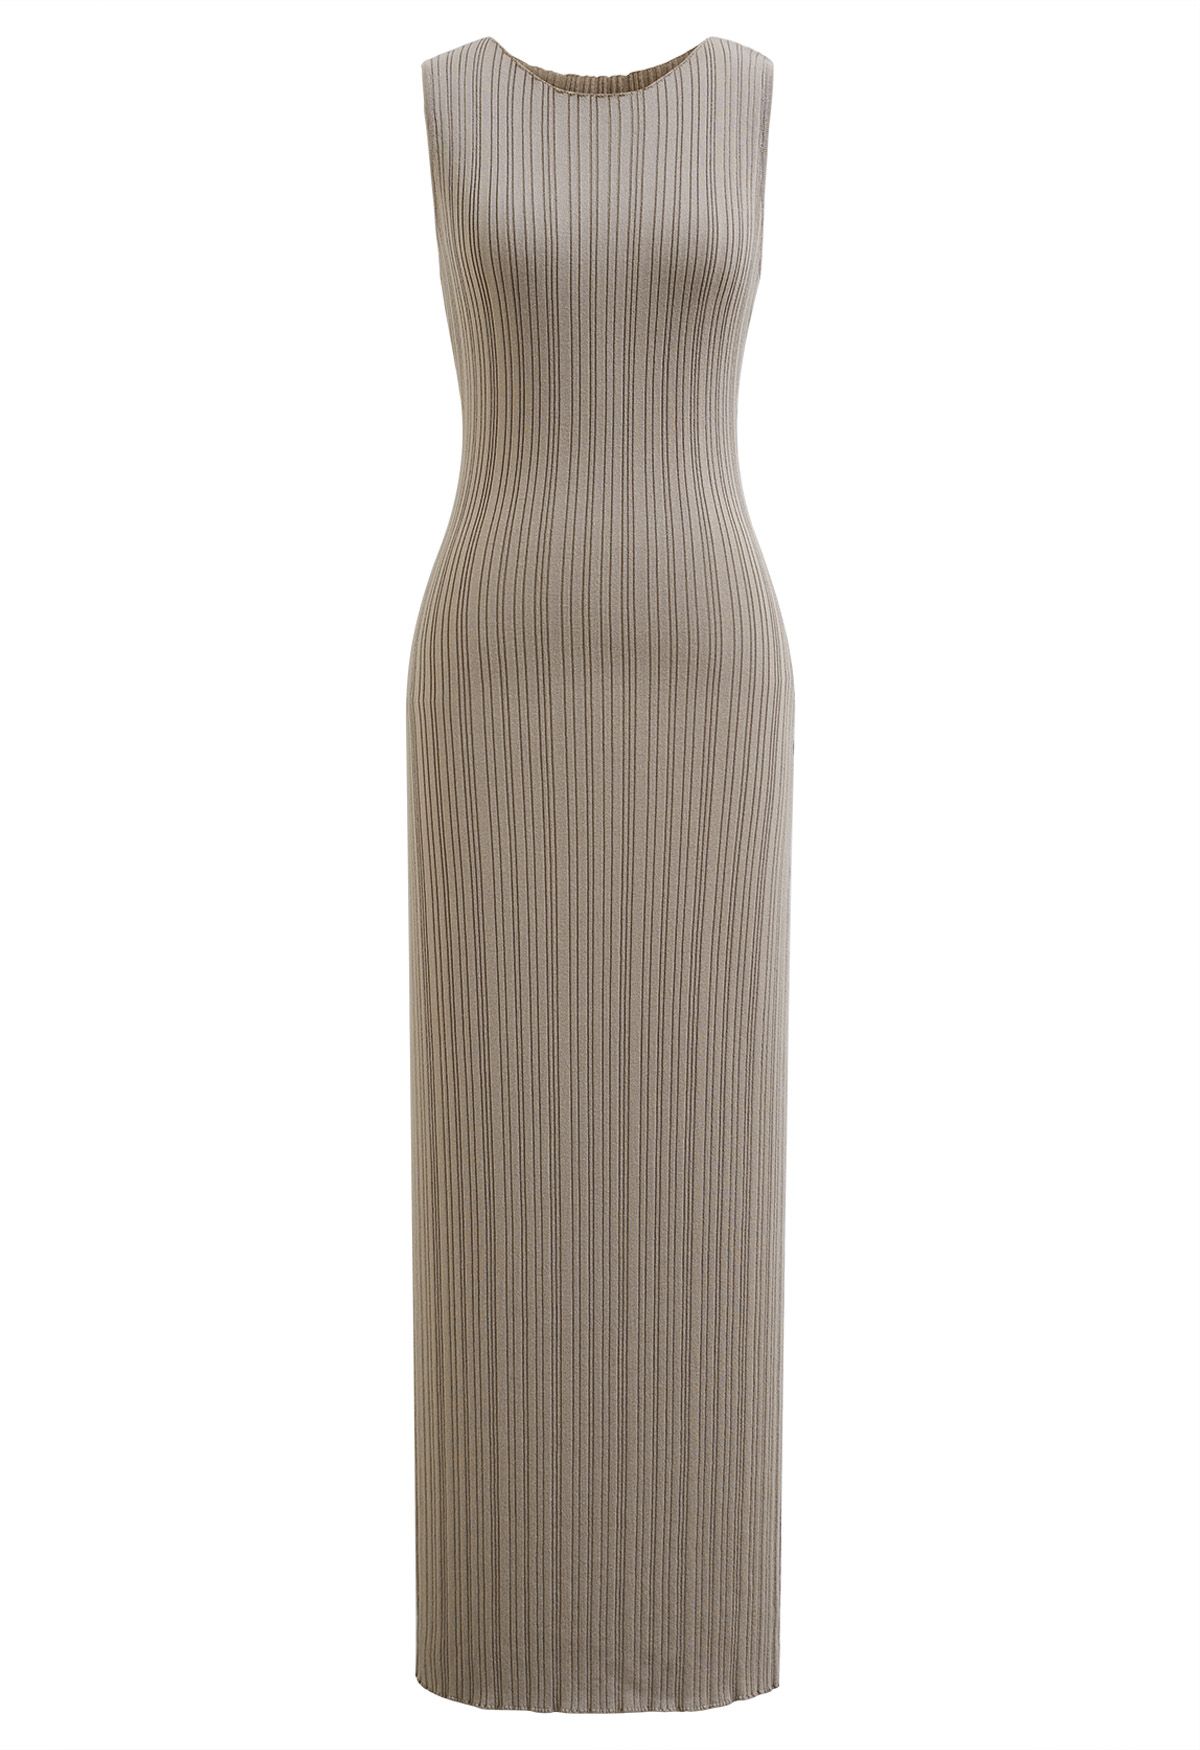 Slit Back Bodycon Sleeveless Knit Maxi Dress in Taupe